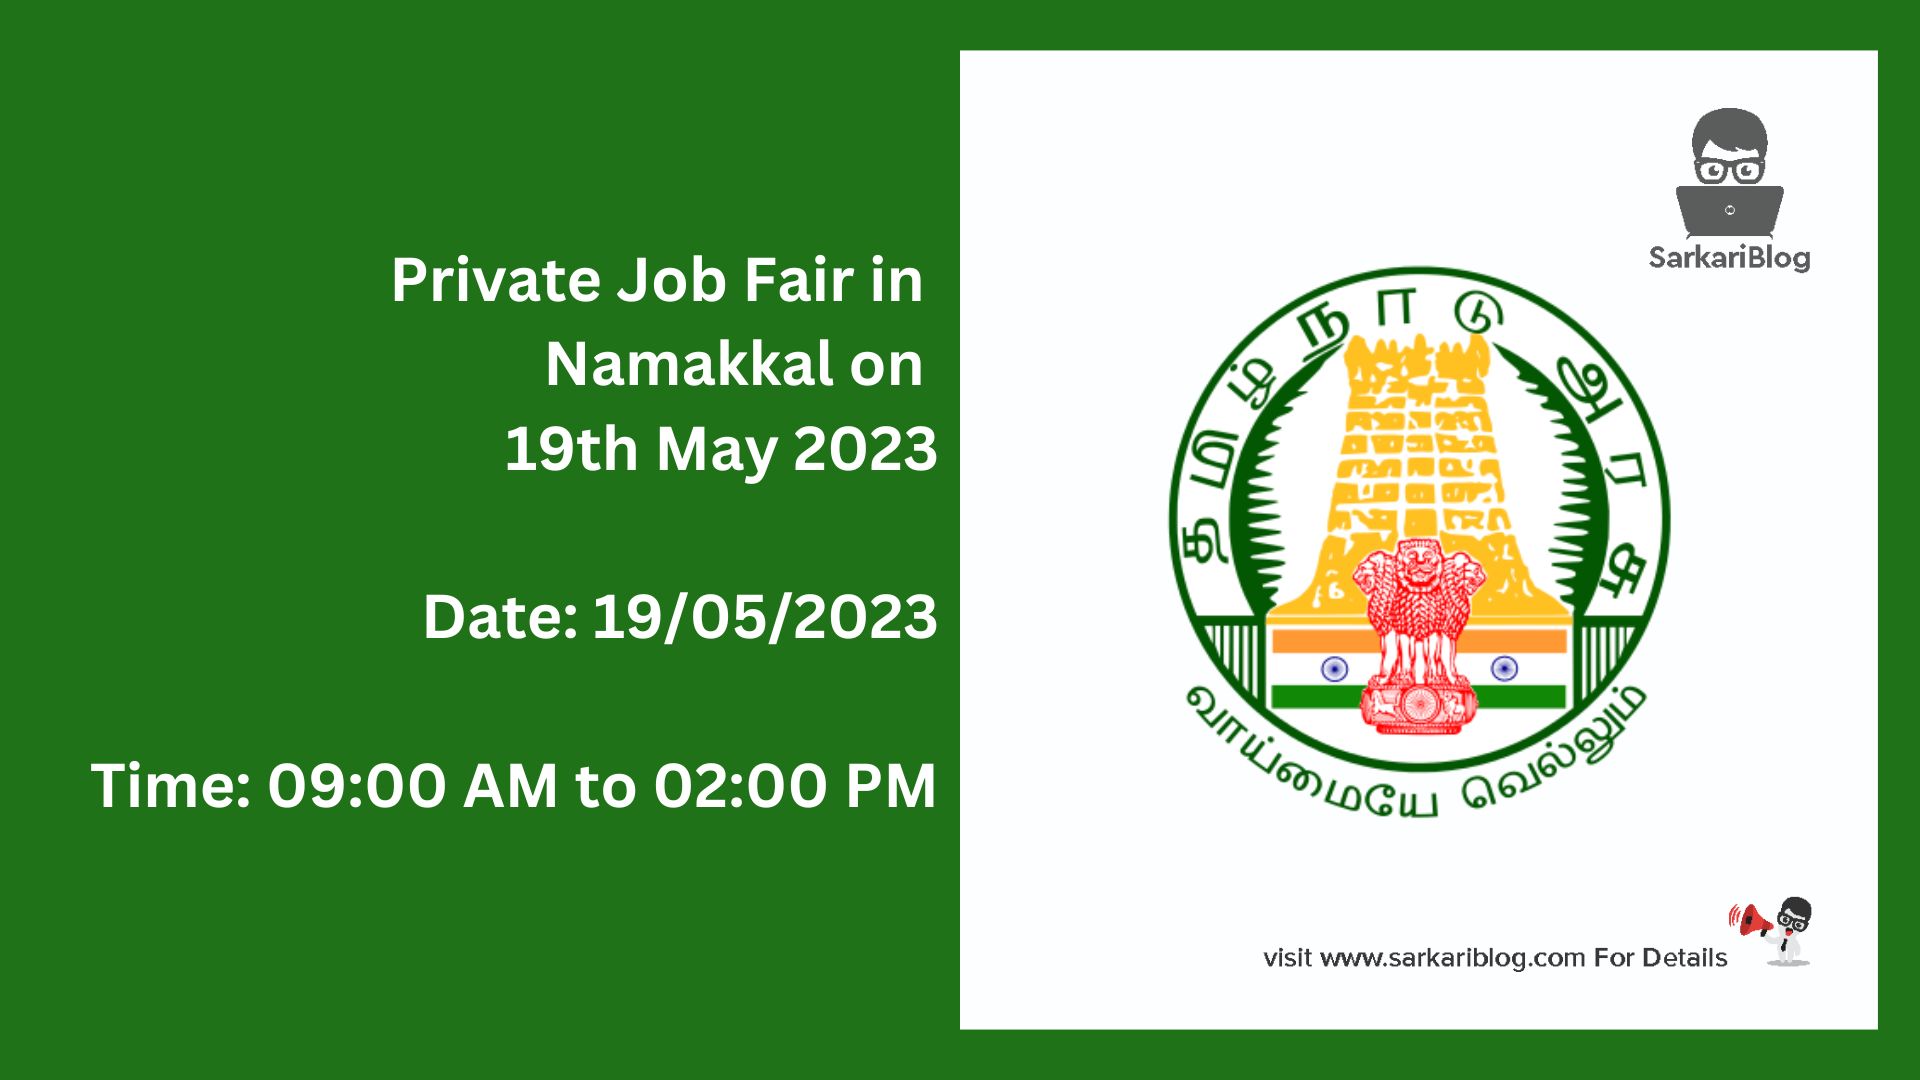 Private Job Fair in Namakkal on 19th May 2023